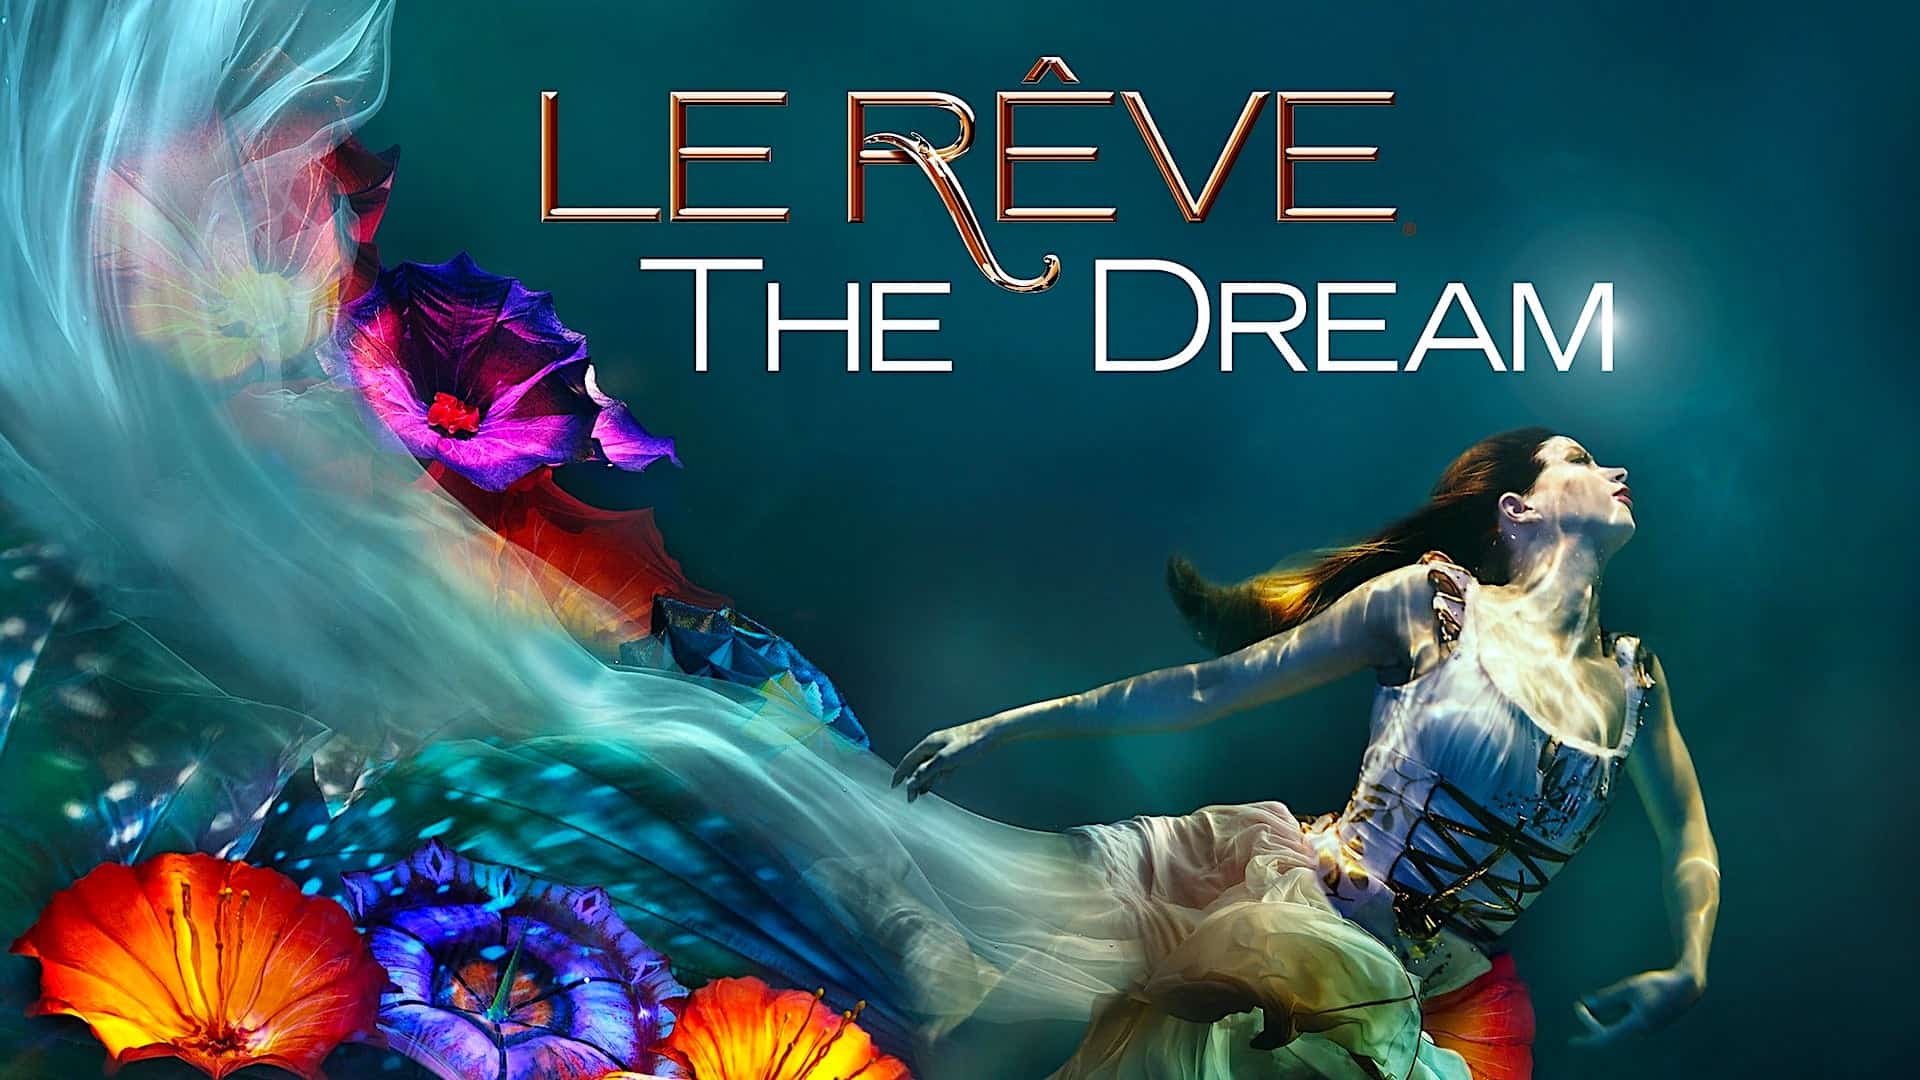 Le Reve Wynn Theater Seating Chart